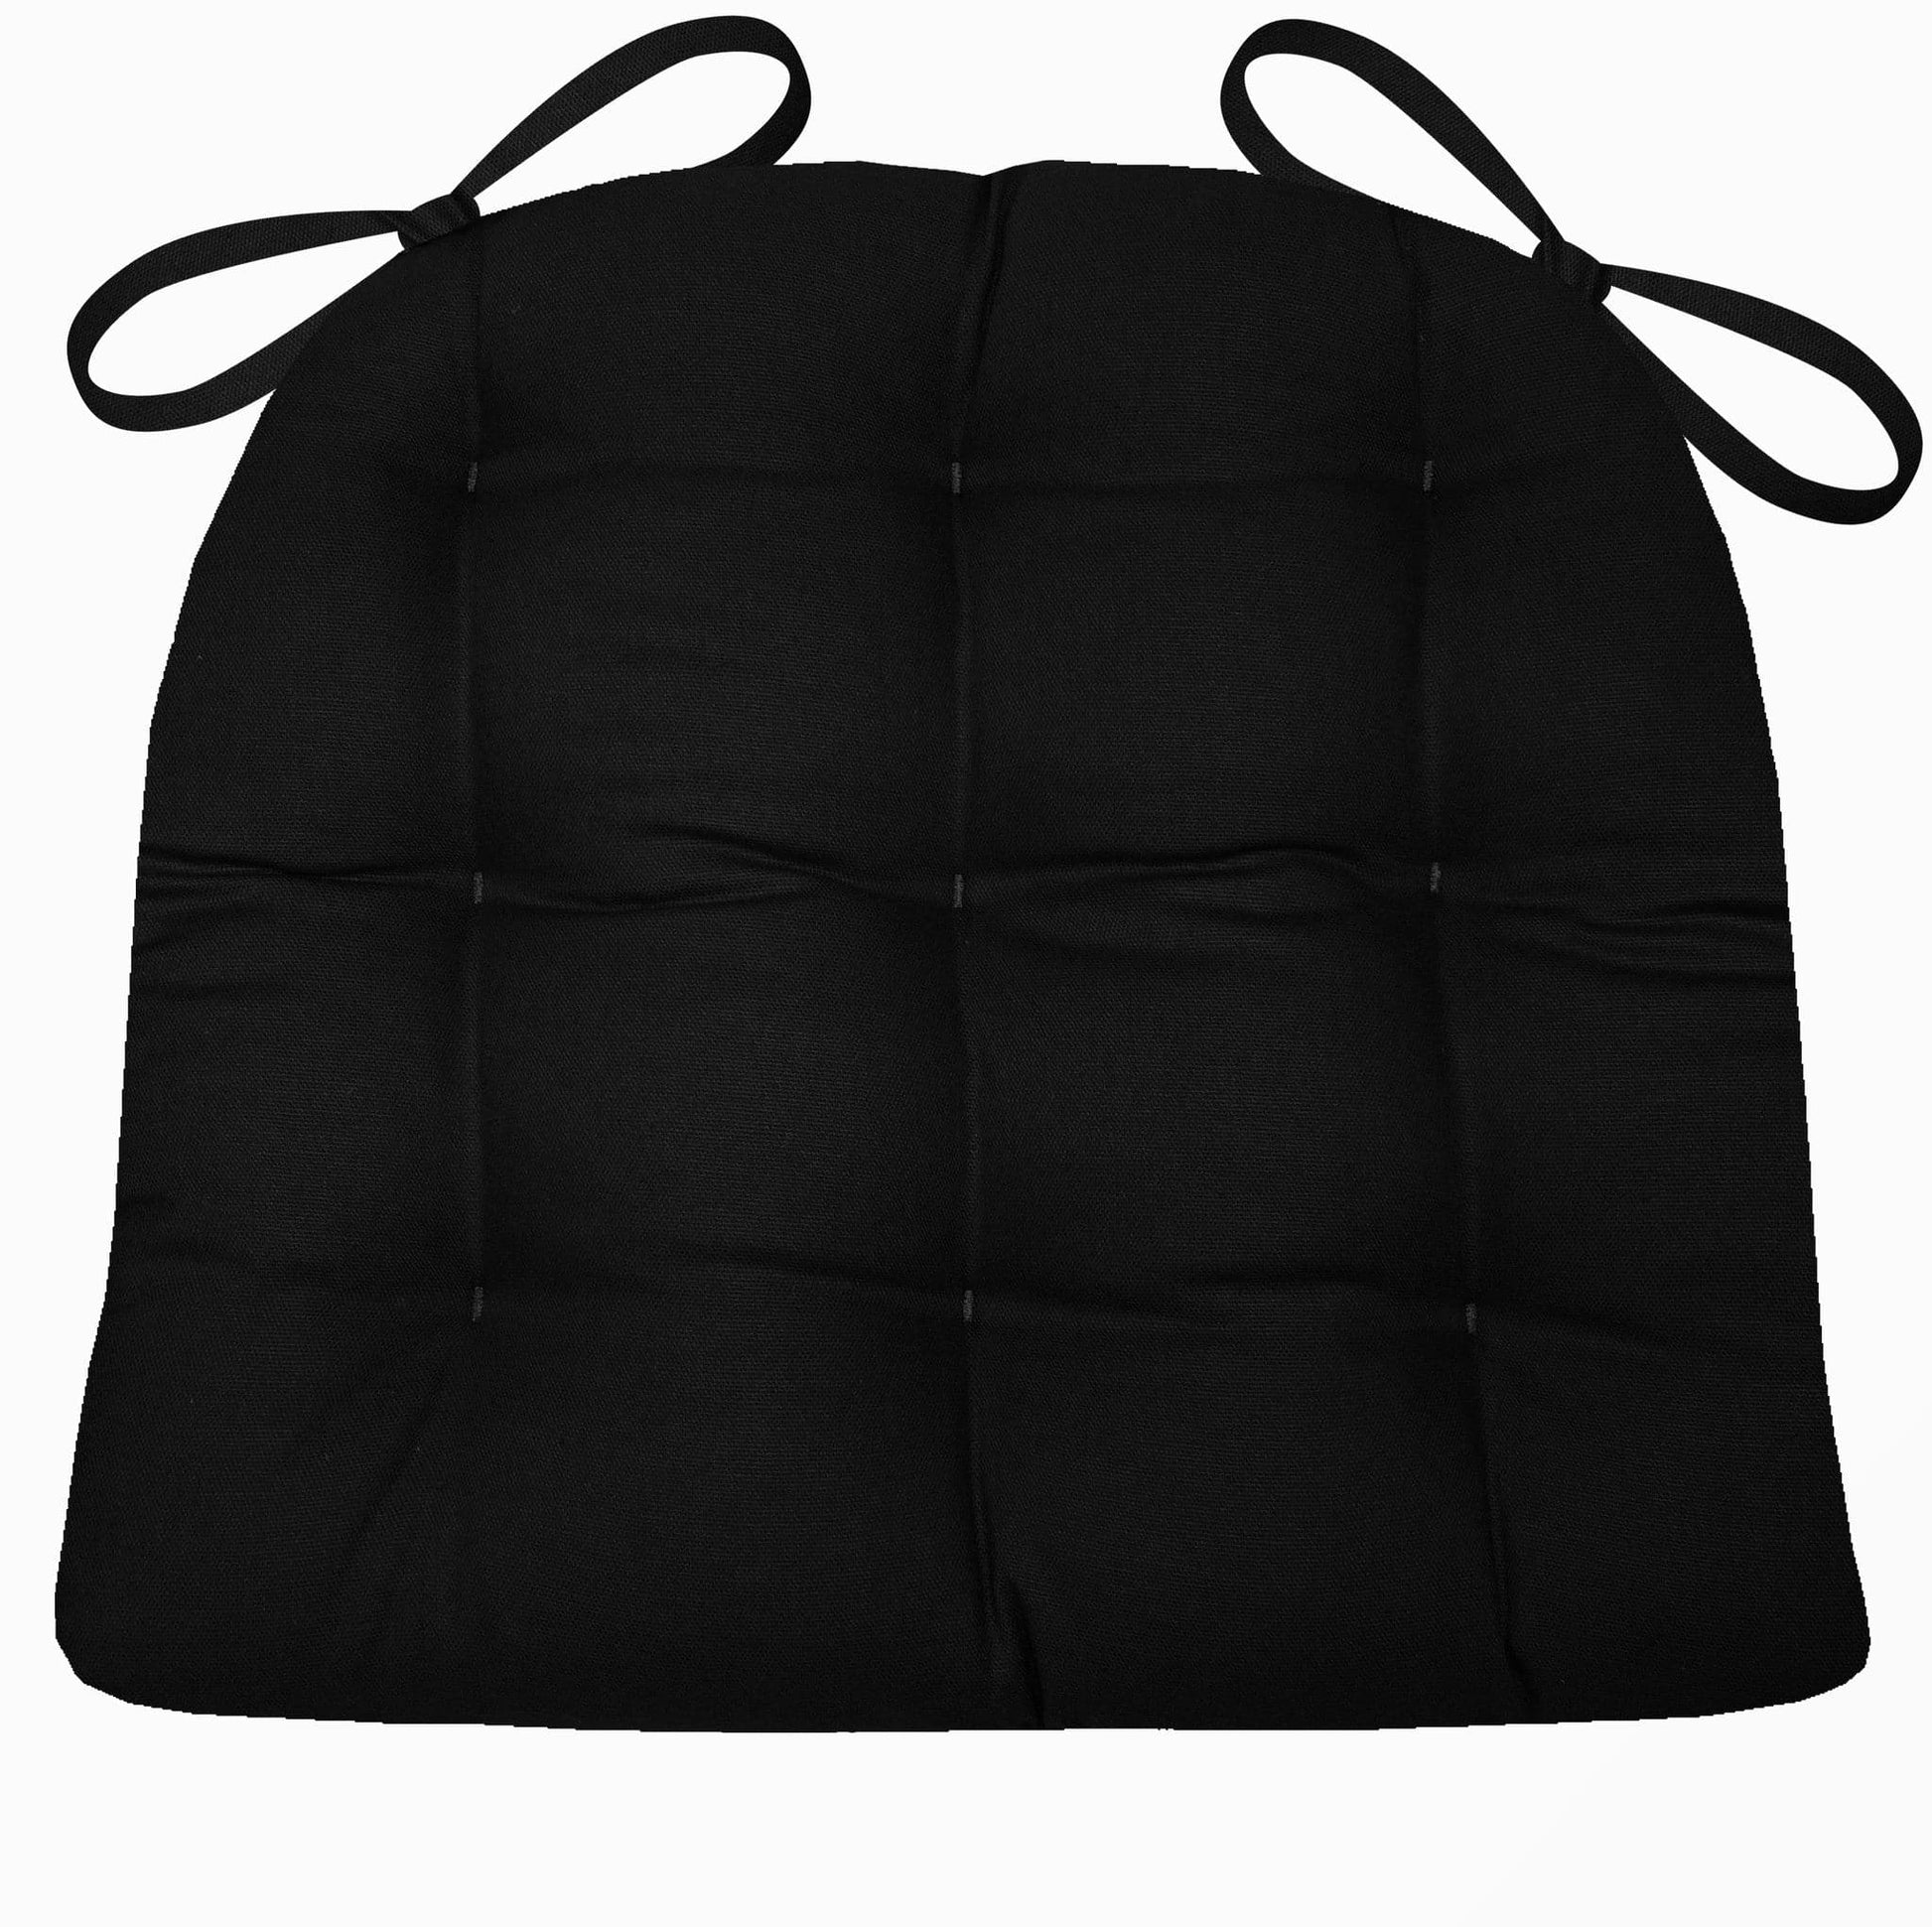 Woodlands Peters Cabin Chair Cushion Reverse to Microsuede Black